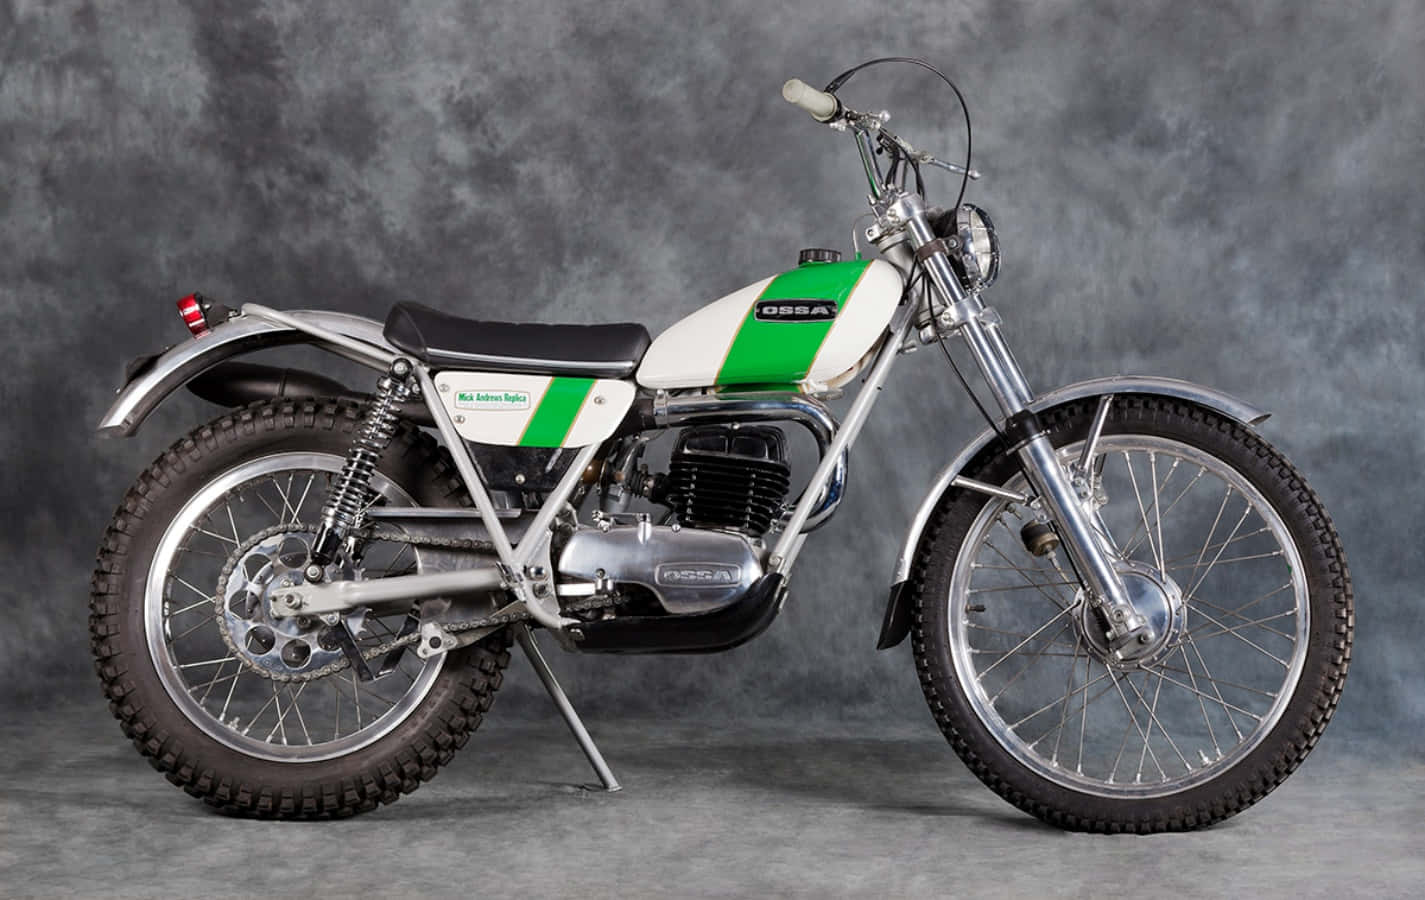 Vintage Ossa Trial Motorcycle Wallpaper